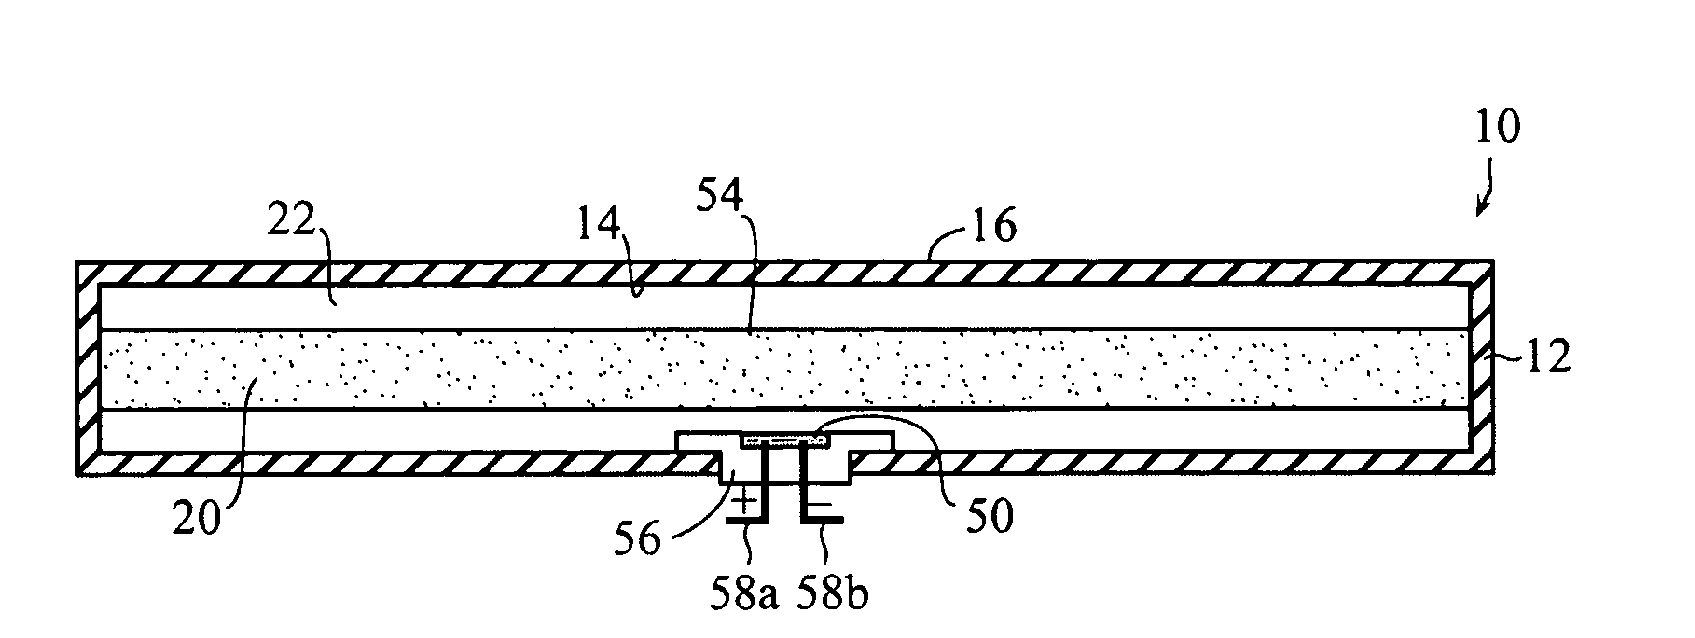 Self-contained Heating Unit and Drug-Supply Unit Employing Same